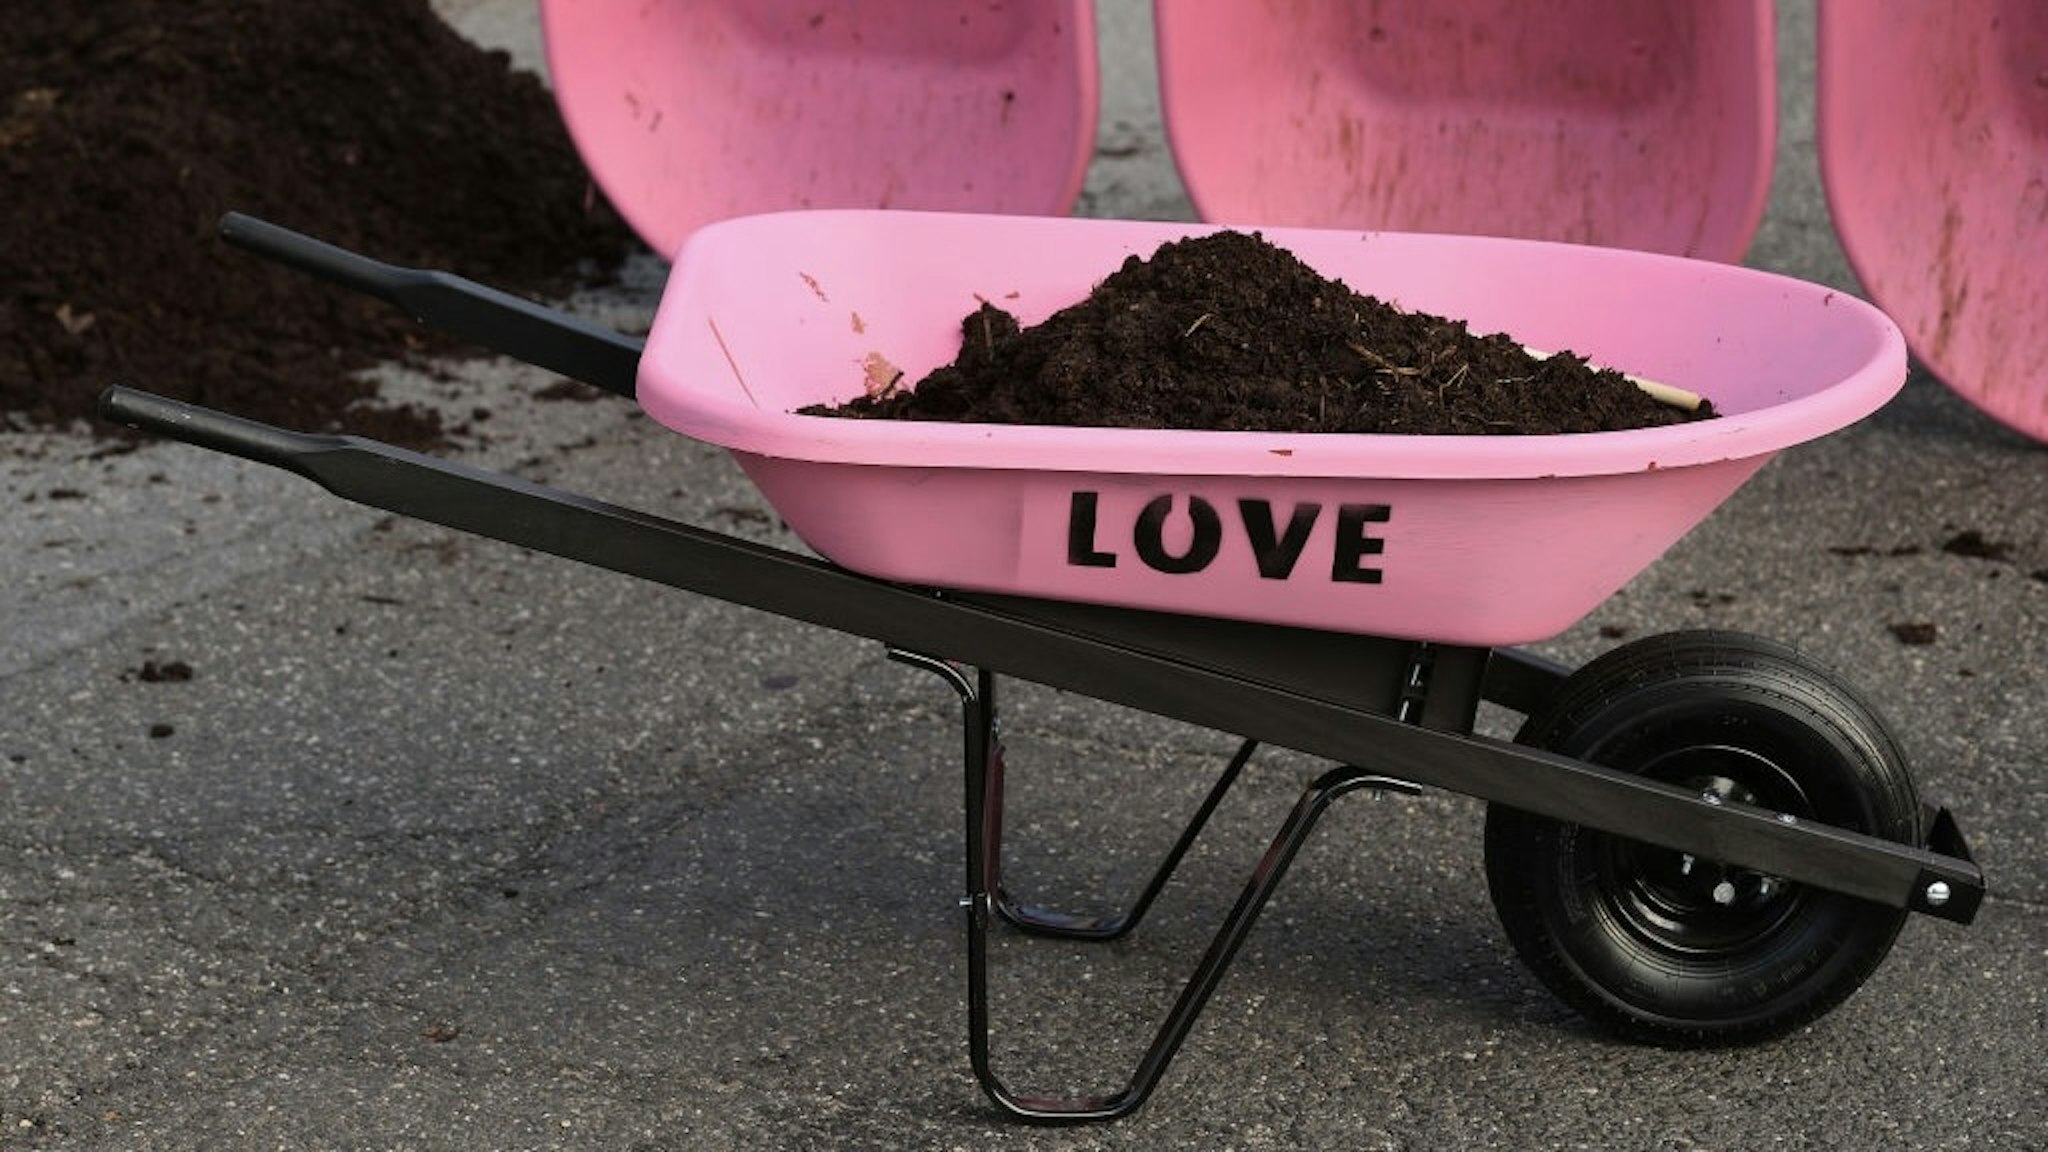 WASHINGTON, DC - APRIL 22: Activists use shovels and wheelbarrows to pile manure on the street outside the White House while protesting against President Joe Biden's climate change policy on Earth Day, April 22, 2021 in Washington, DC. Organized by the Extinction Rebellion DC, protesters used bright pink wheelbarrows to dump heaps of cow manure at the intersection of New York Avenue and 17th Street NW on the west side of the White House campus. Despite the White House hosting a virtual Leaders Summit on Climate on Earth Day, the activists said Biden is "punting the crisis to future generations." (Photo by Chip Somodevilla/Getty Images)